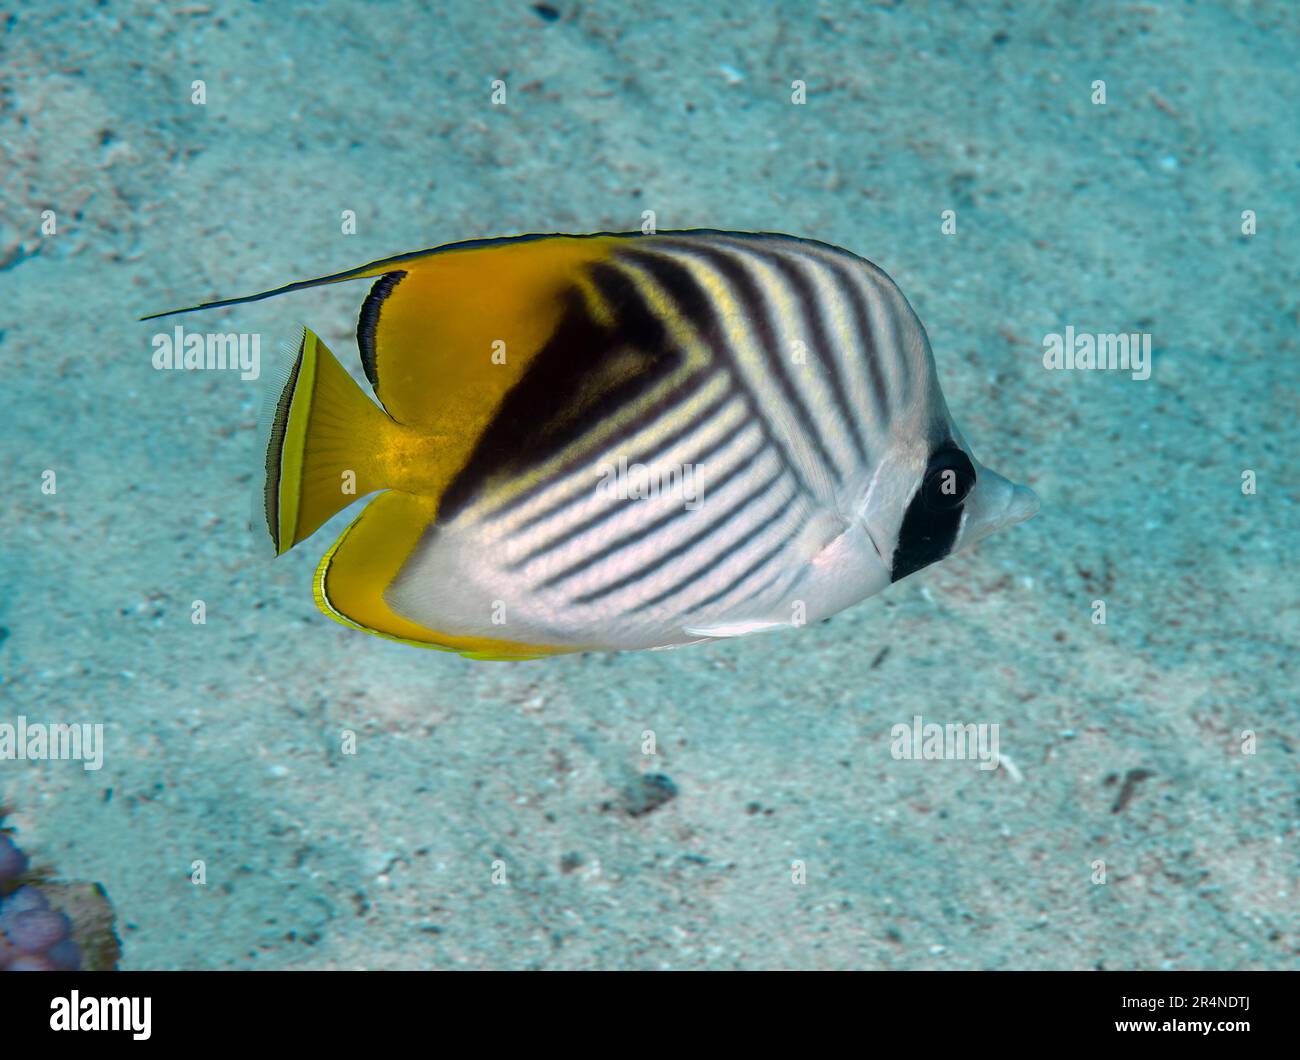 A Threadfin Butterflyfish (Chaetodon auriga) in the Red Sea, Egypt Stock Photo